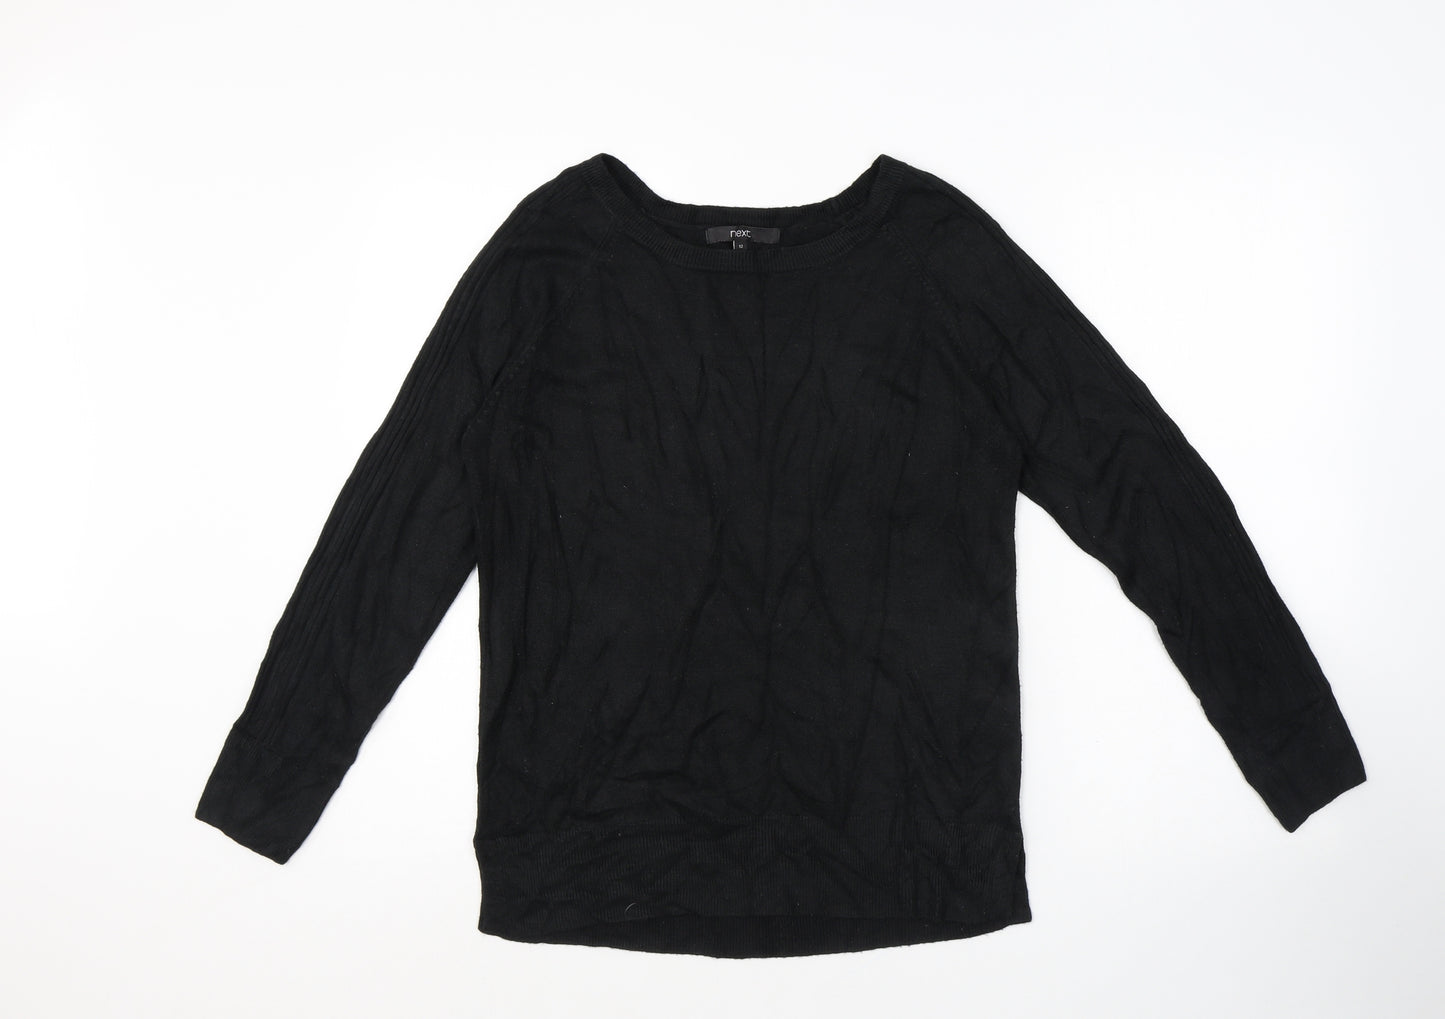 NEXT Womens Black Round Neck Acrylic Pullover Jumper Size 12